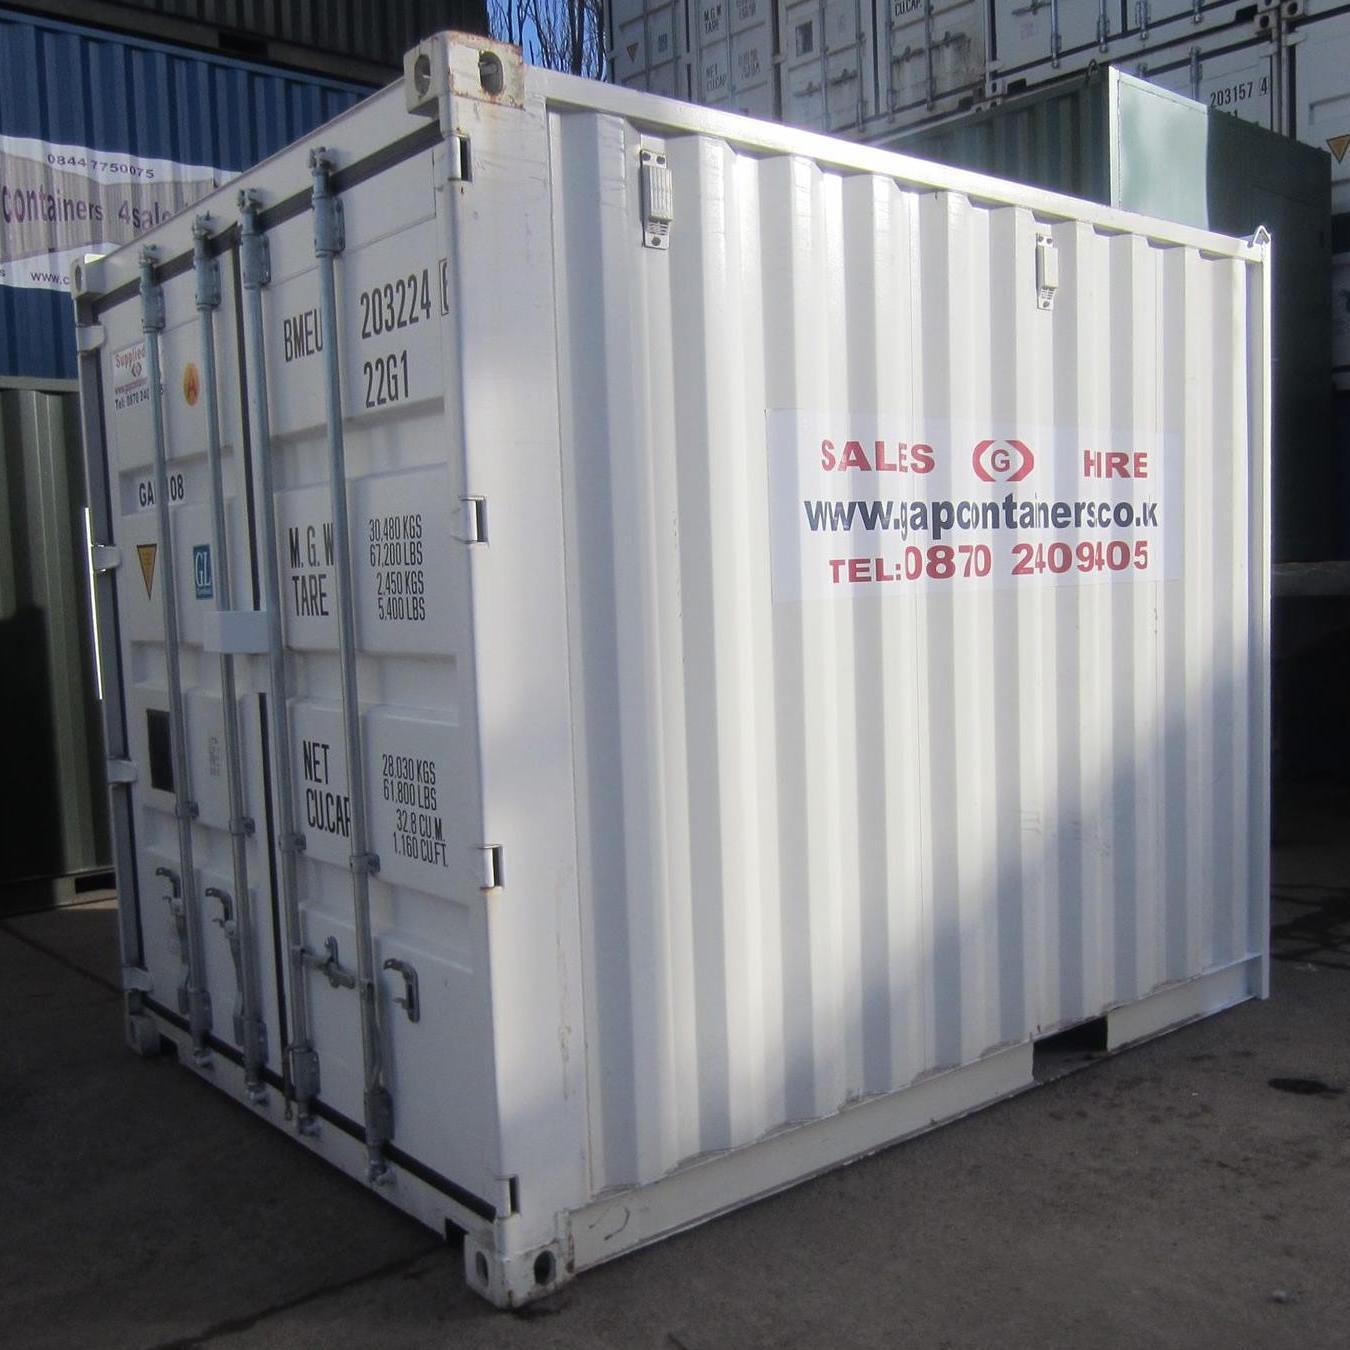 Gap Containers Ltd Is a UK based container company supplying all types of containers nationwide. http://t.co/Prnfb0REoL
     Call us now: 0870 2409405